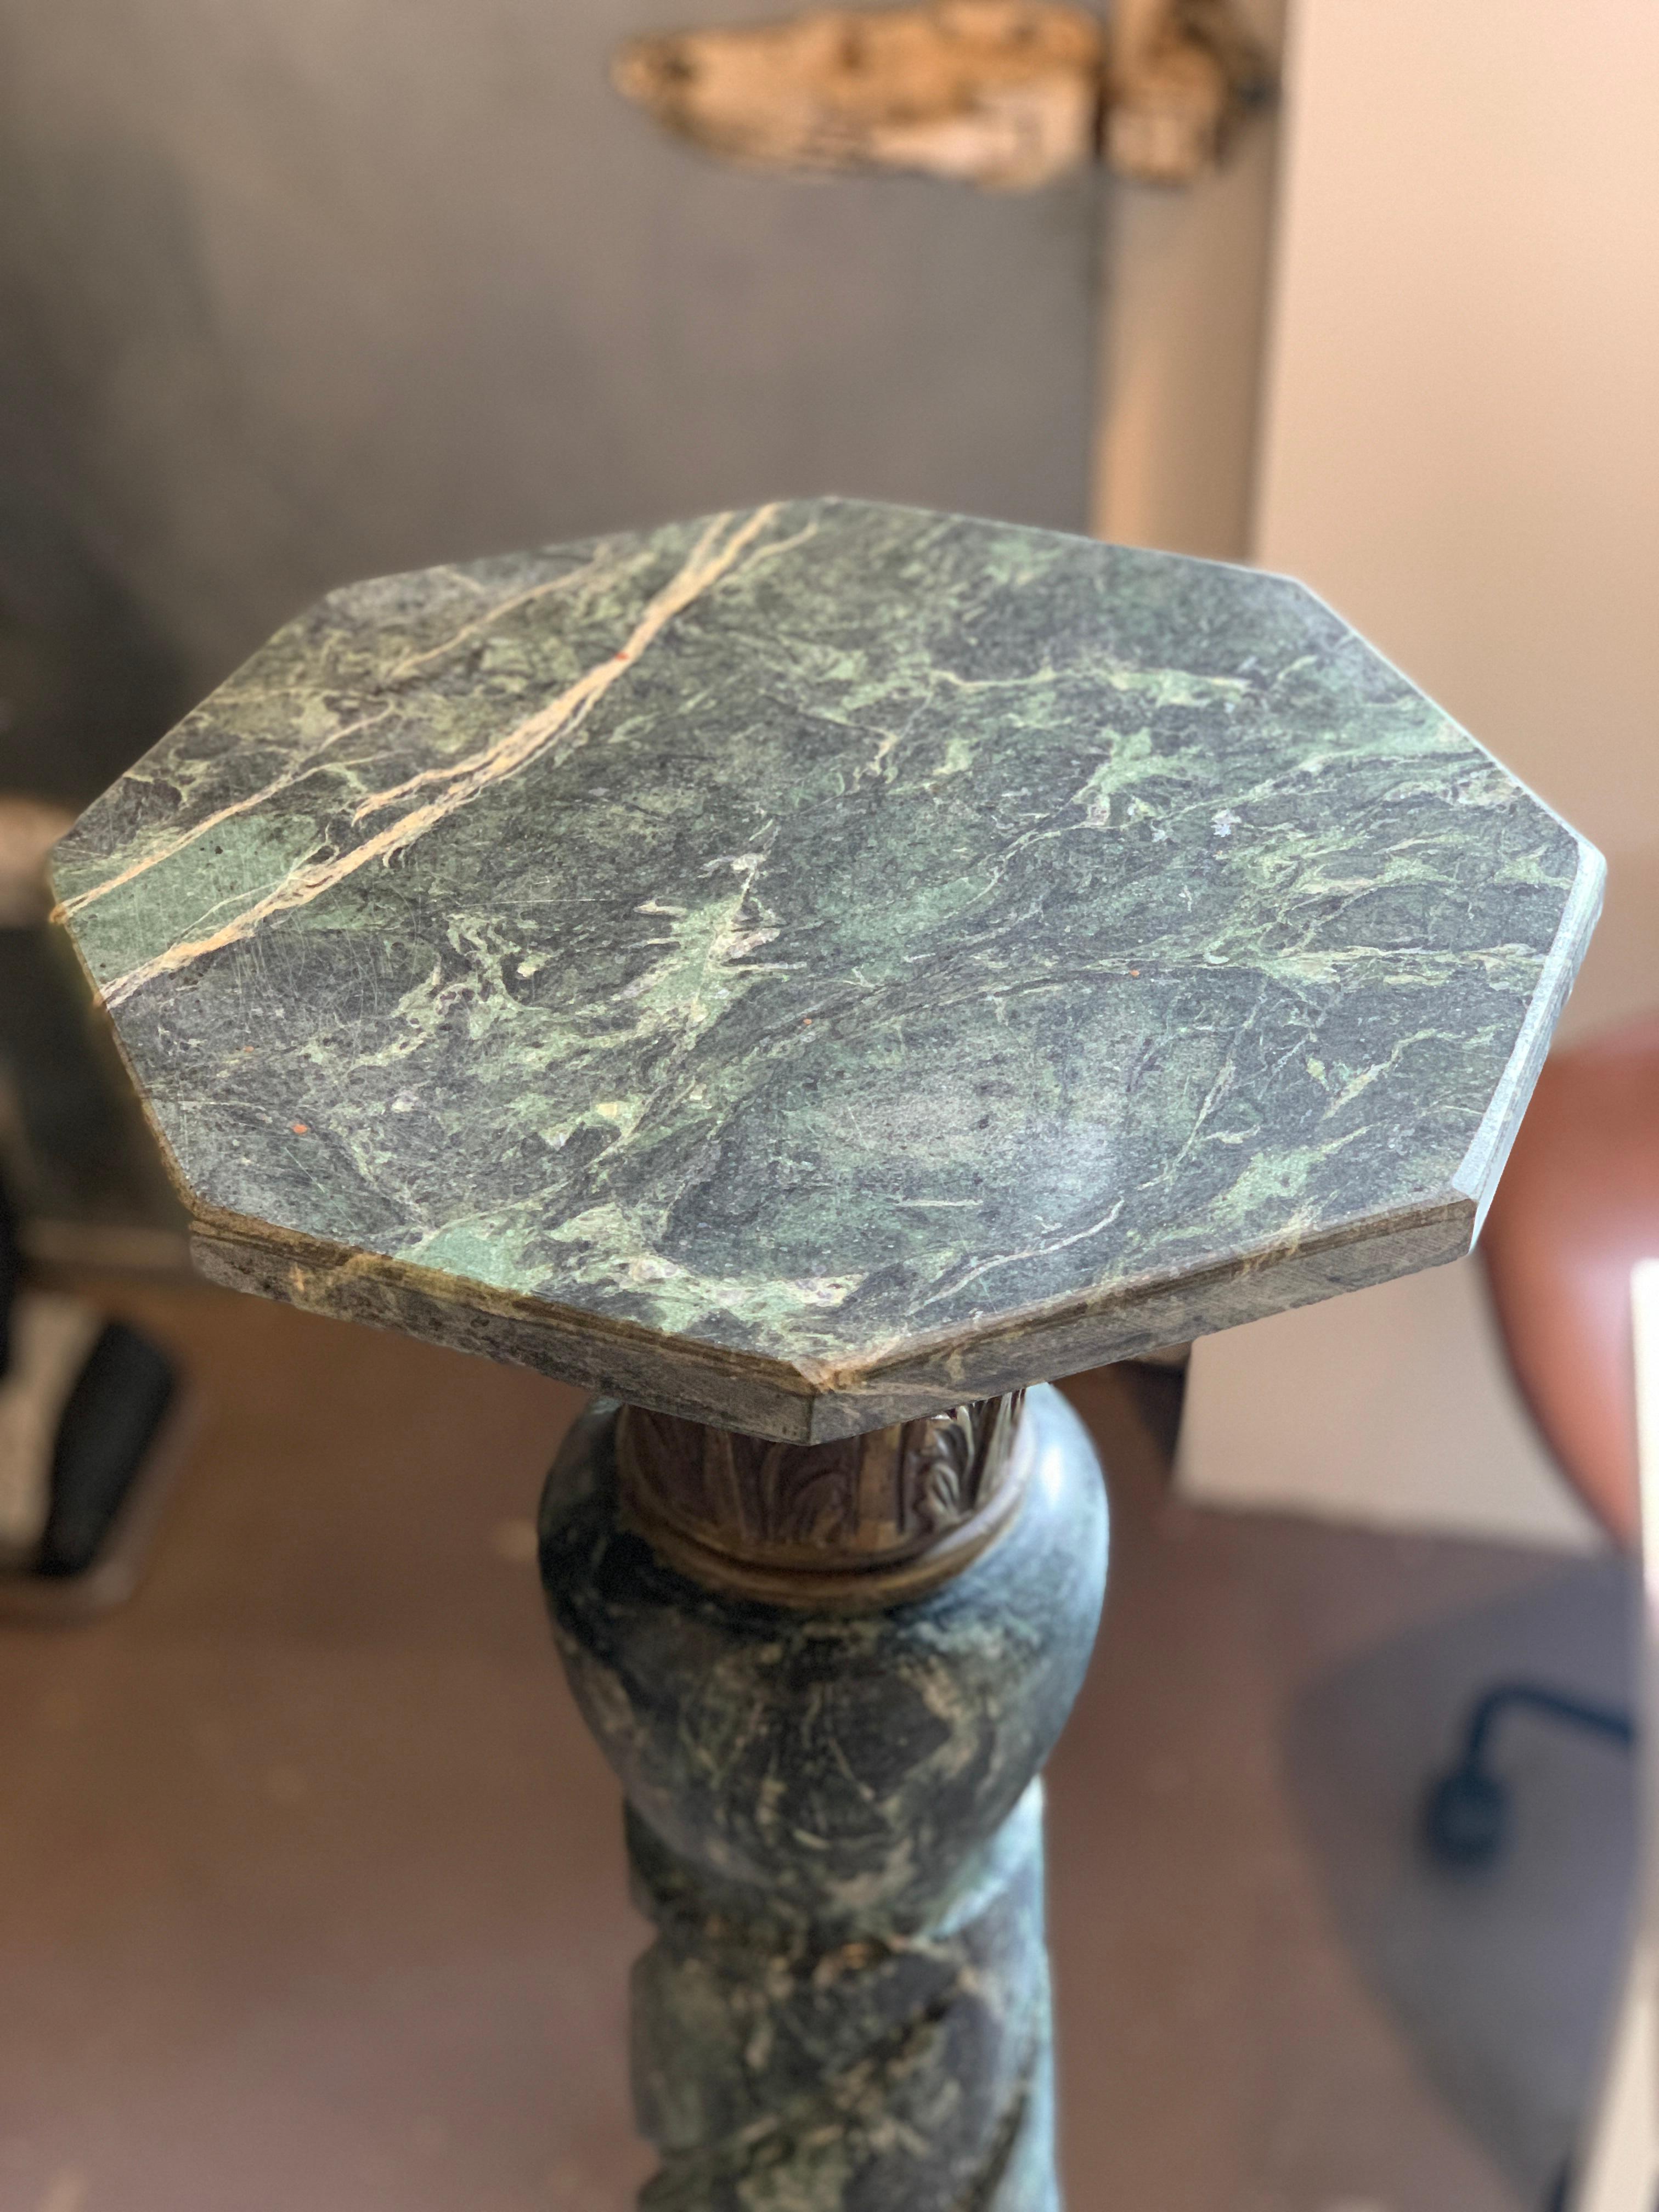 This vintage Italian marble sculpture pedestal offers an octagonal display surmounting a cluster column with an acanthus capital, seated on a rounded plinth. The Emerald green color, customary to Louis XV style columns, was widely popular in the